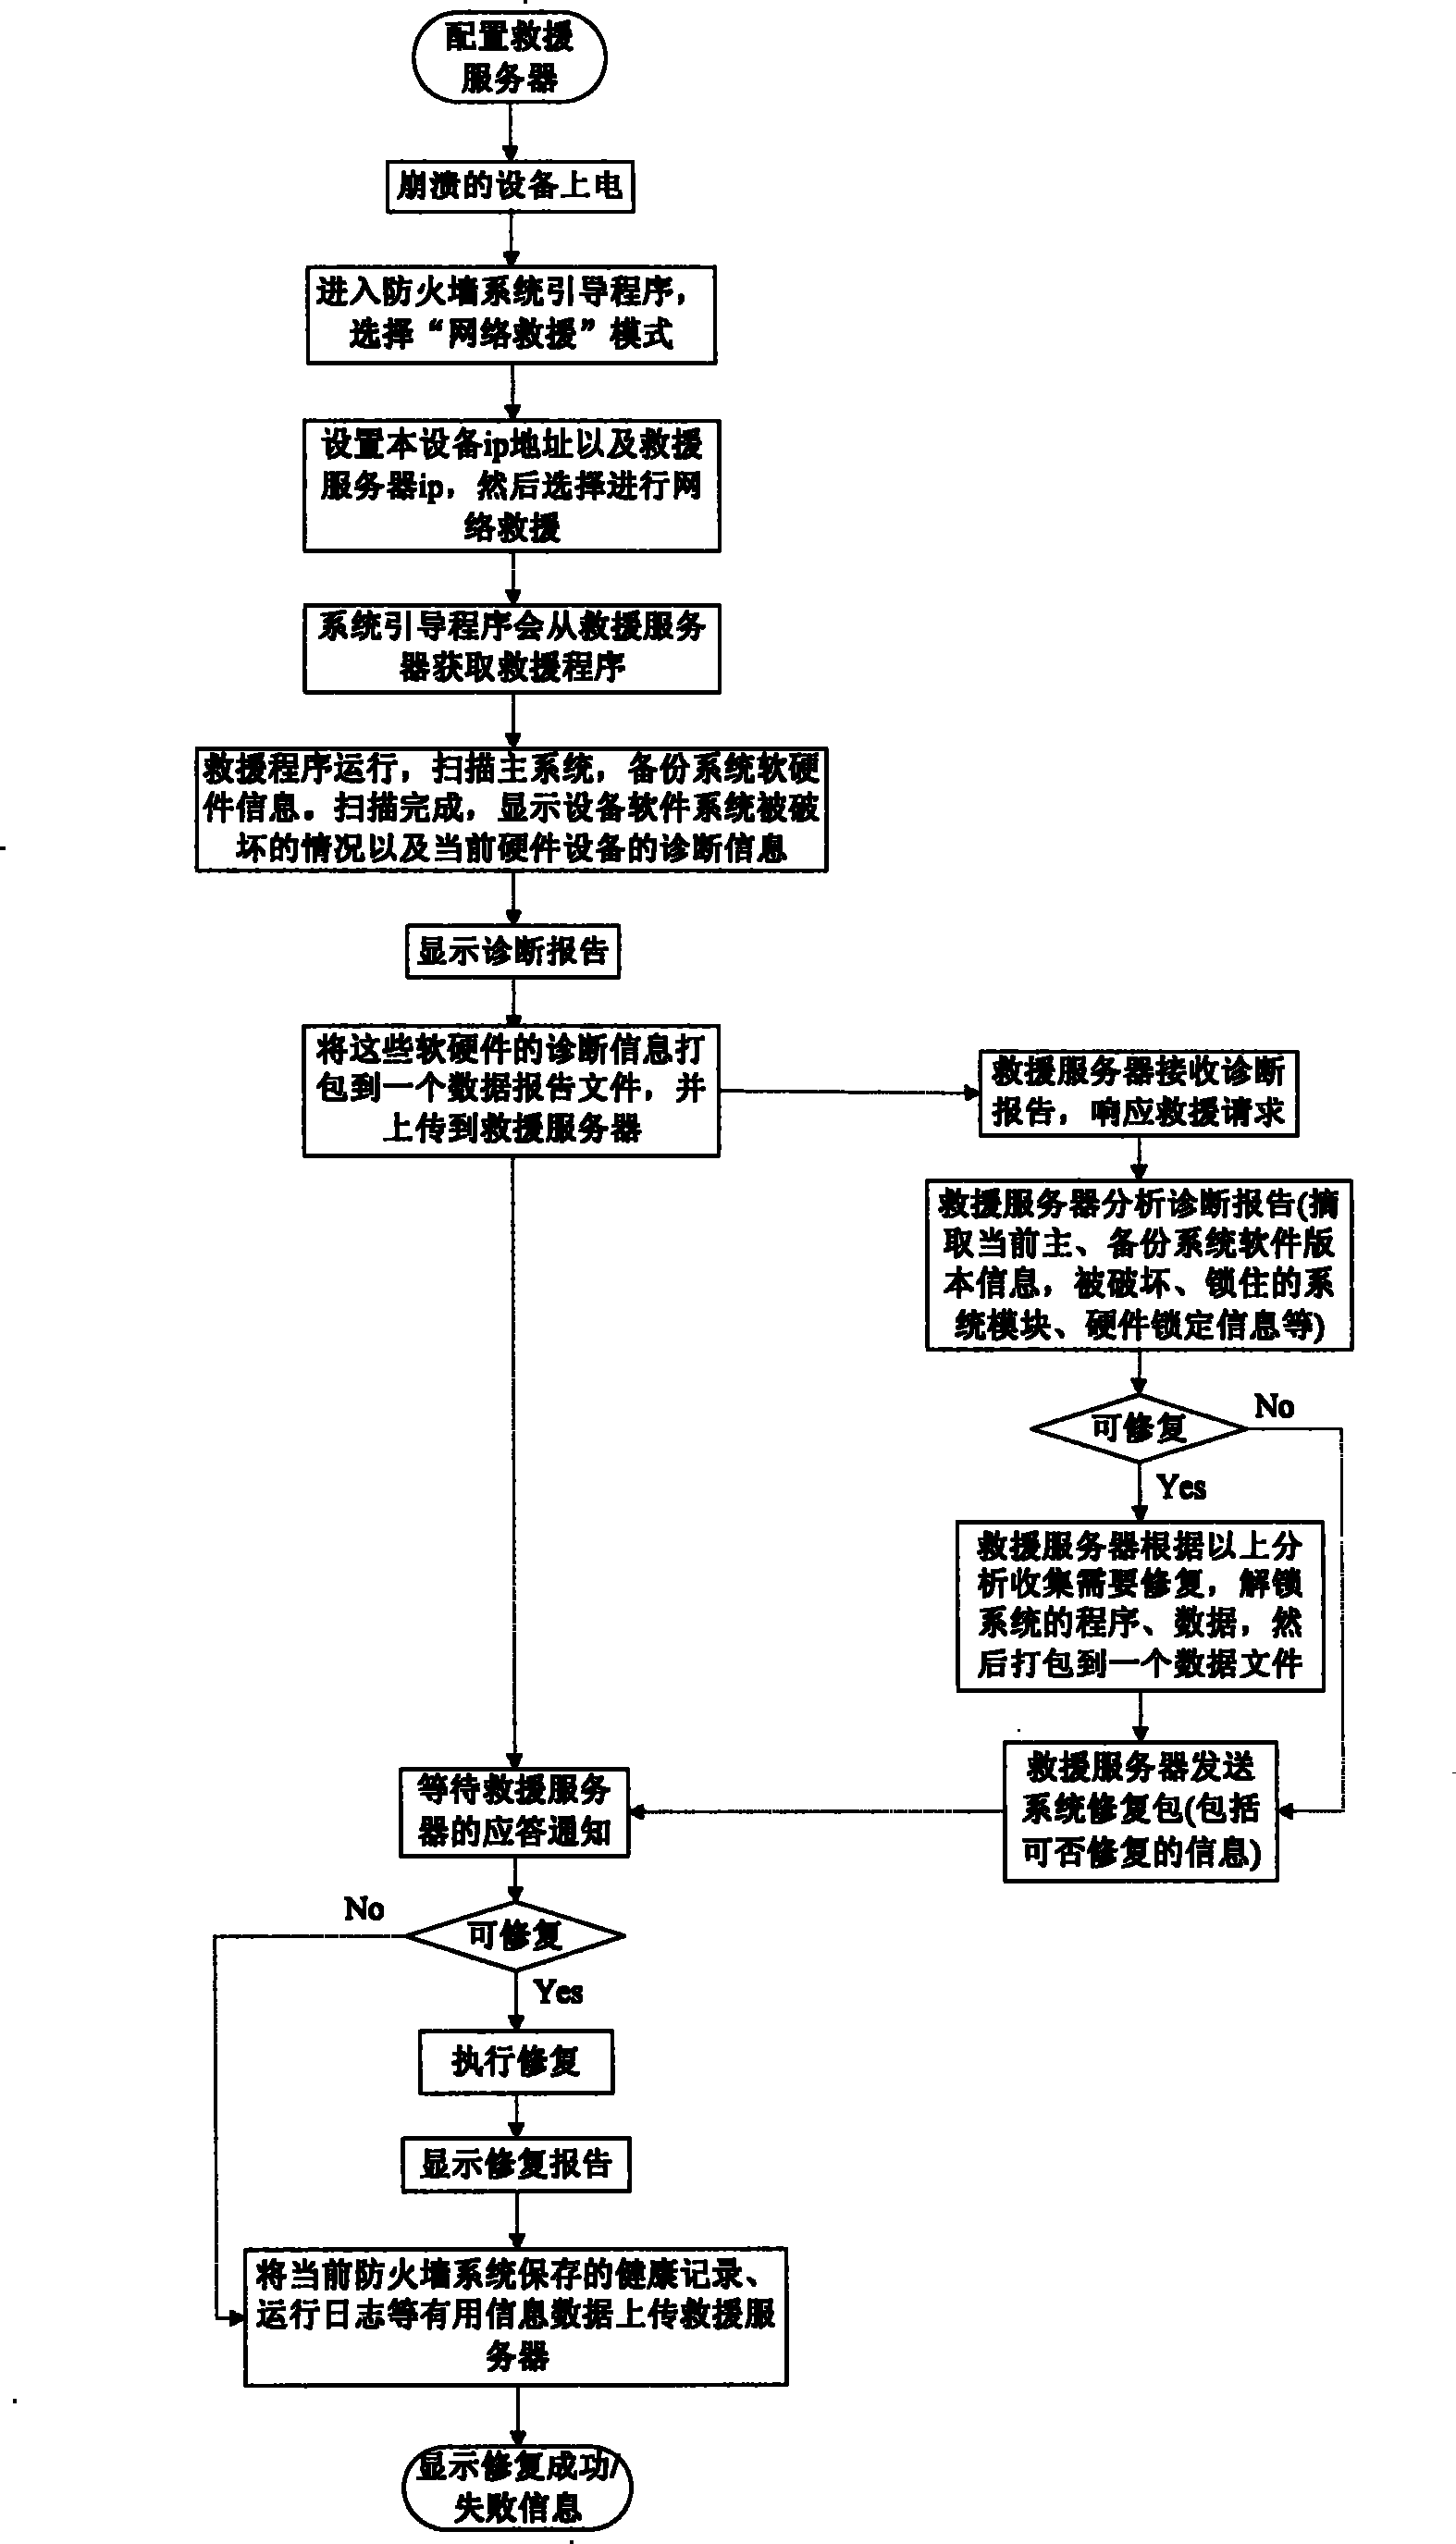 Automatic repair method for firewall system